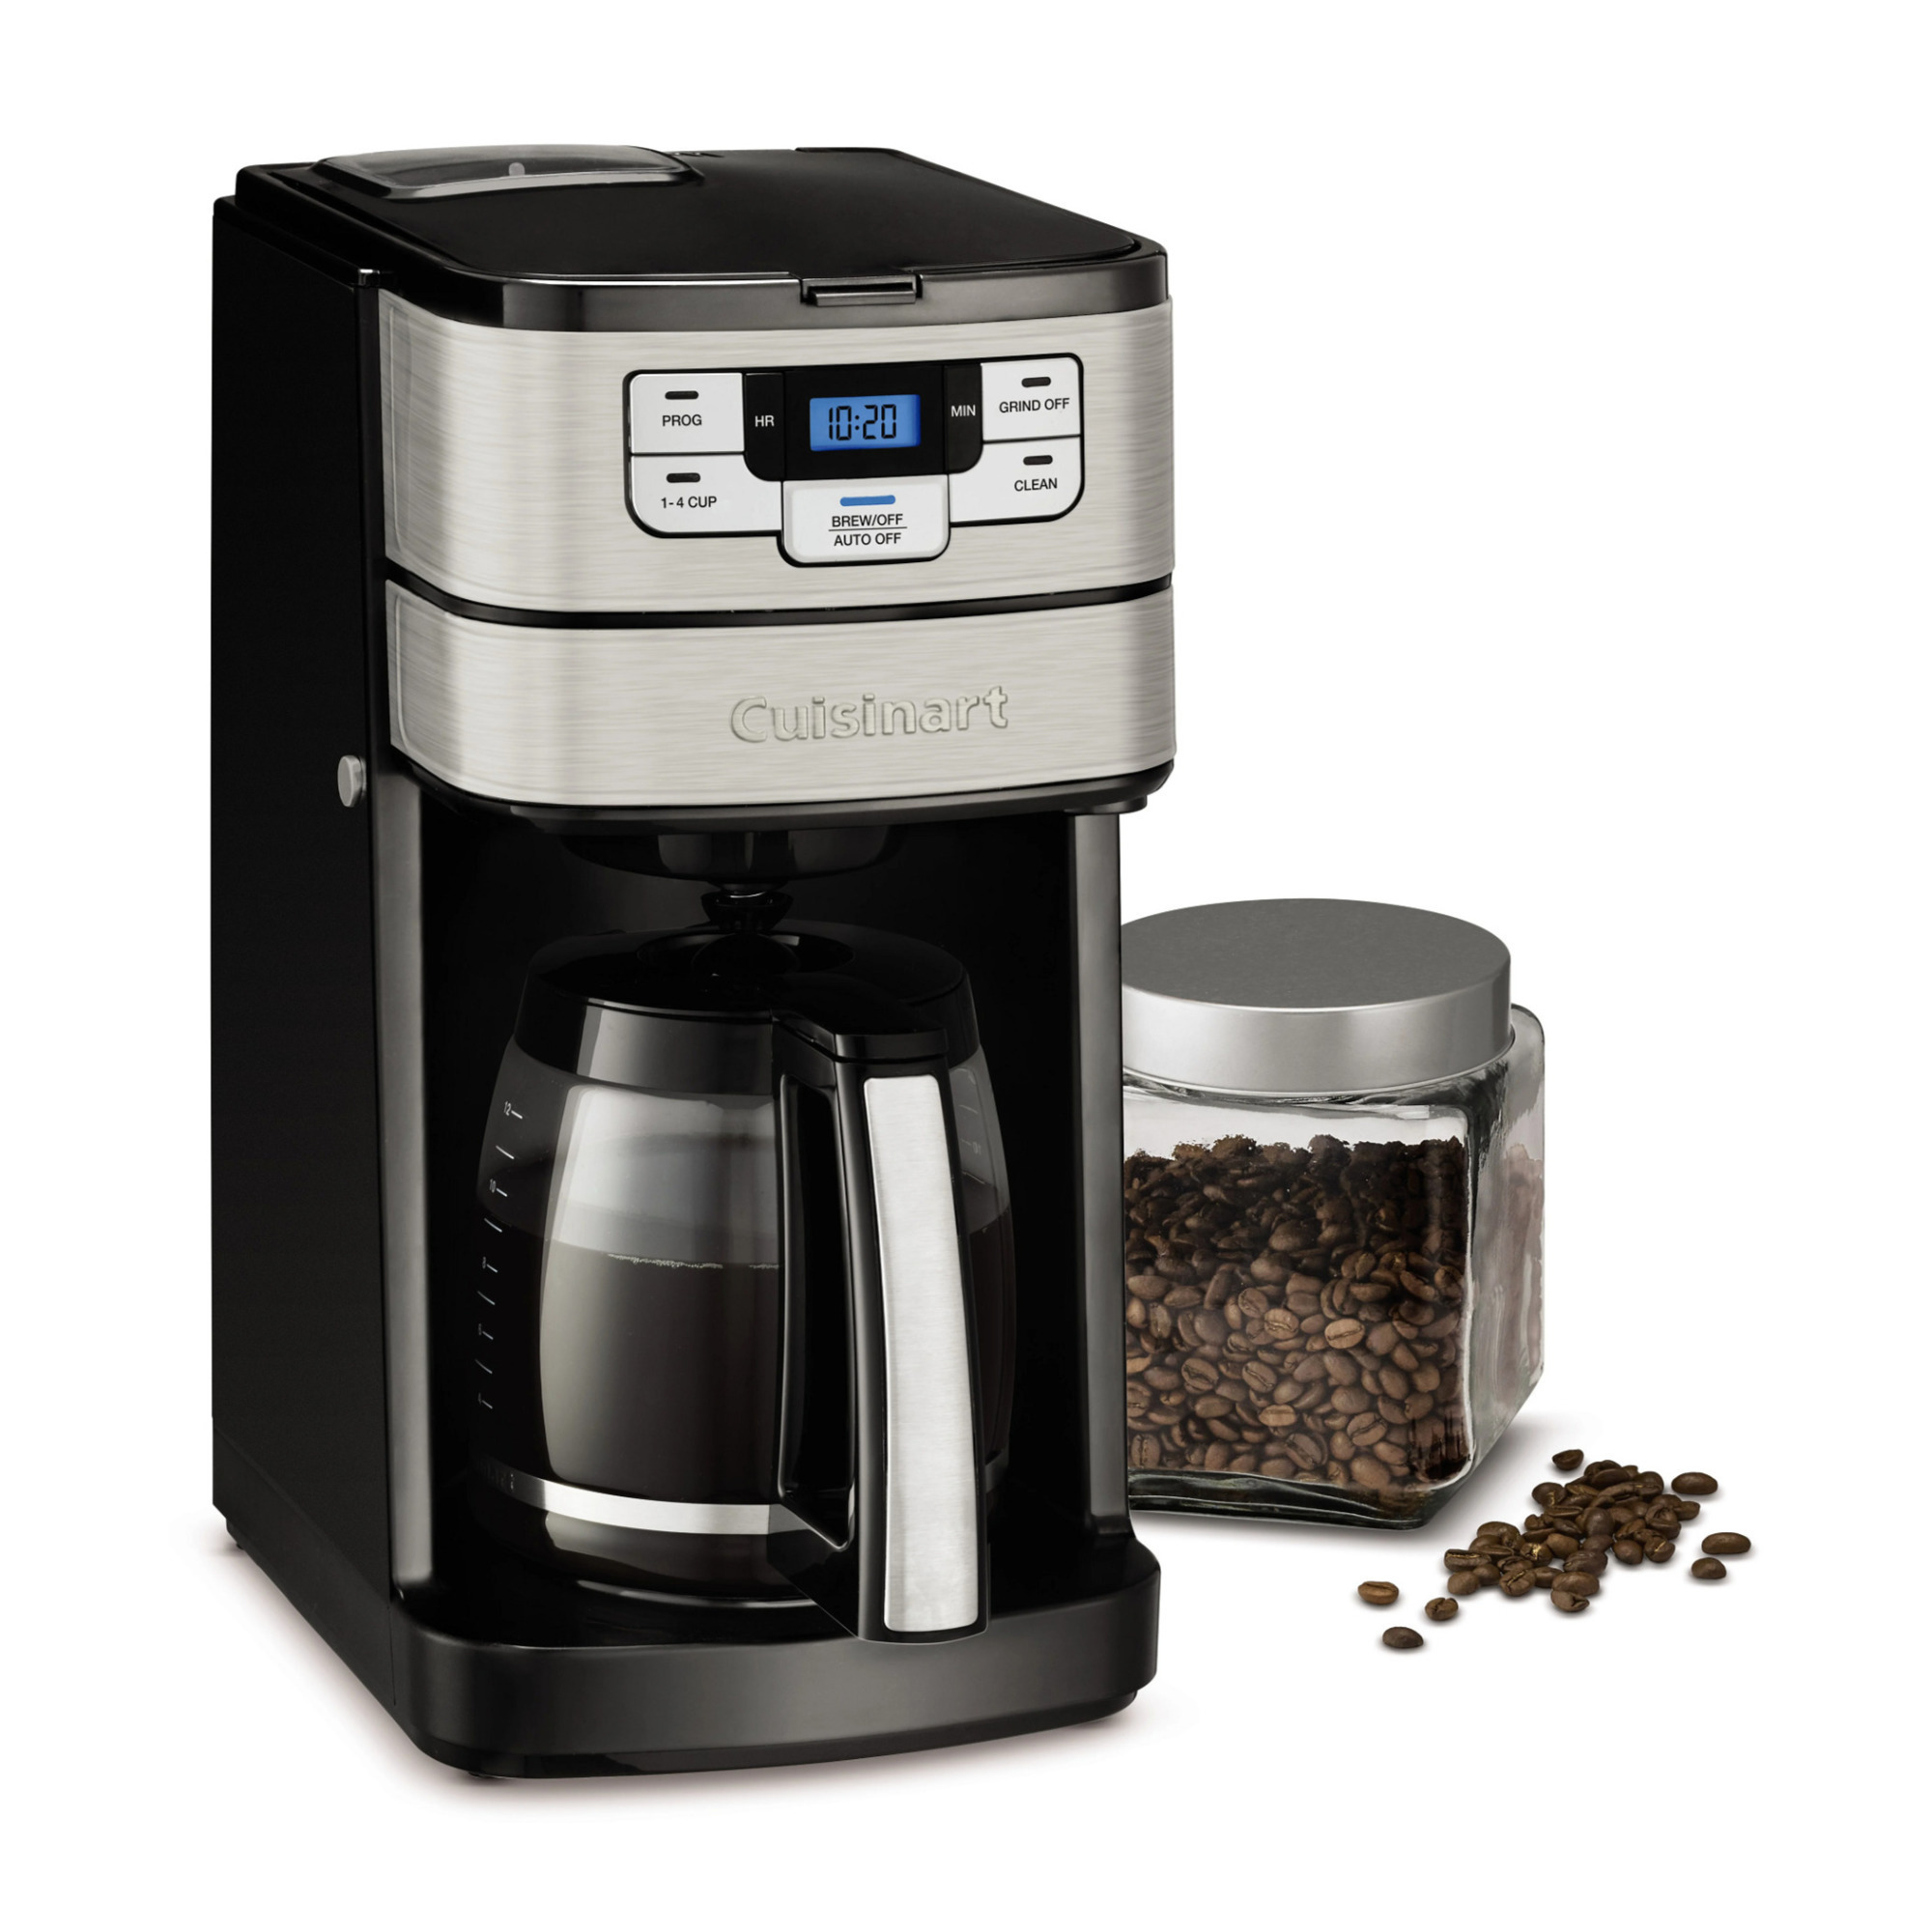 Cuisinart DGB-400 Automatic Grind and Brew 12-Cup Coffeemaker & Descaling Liquid